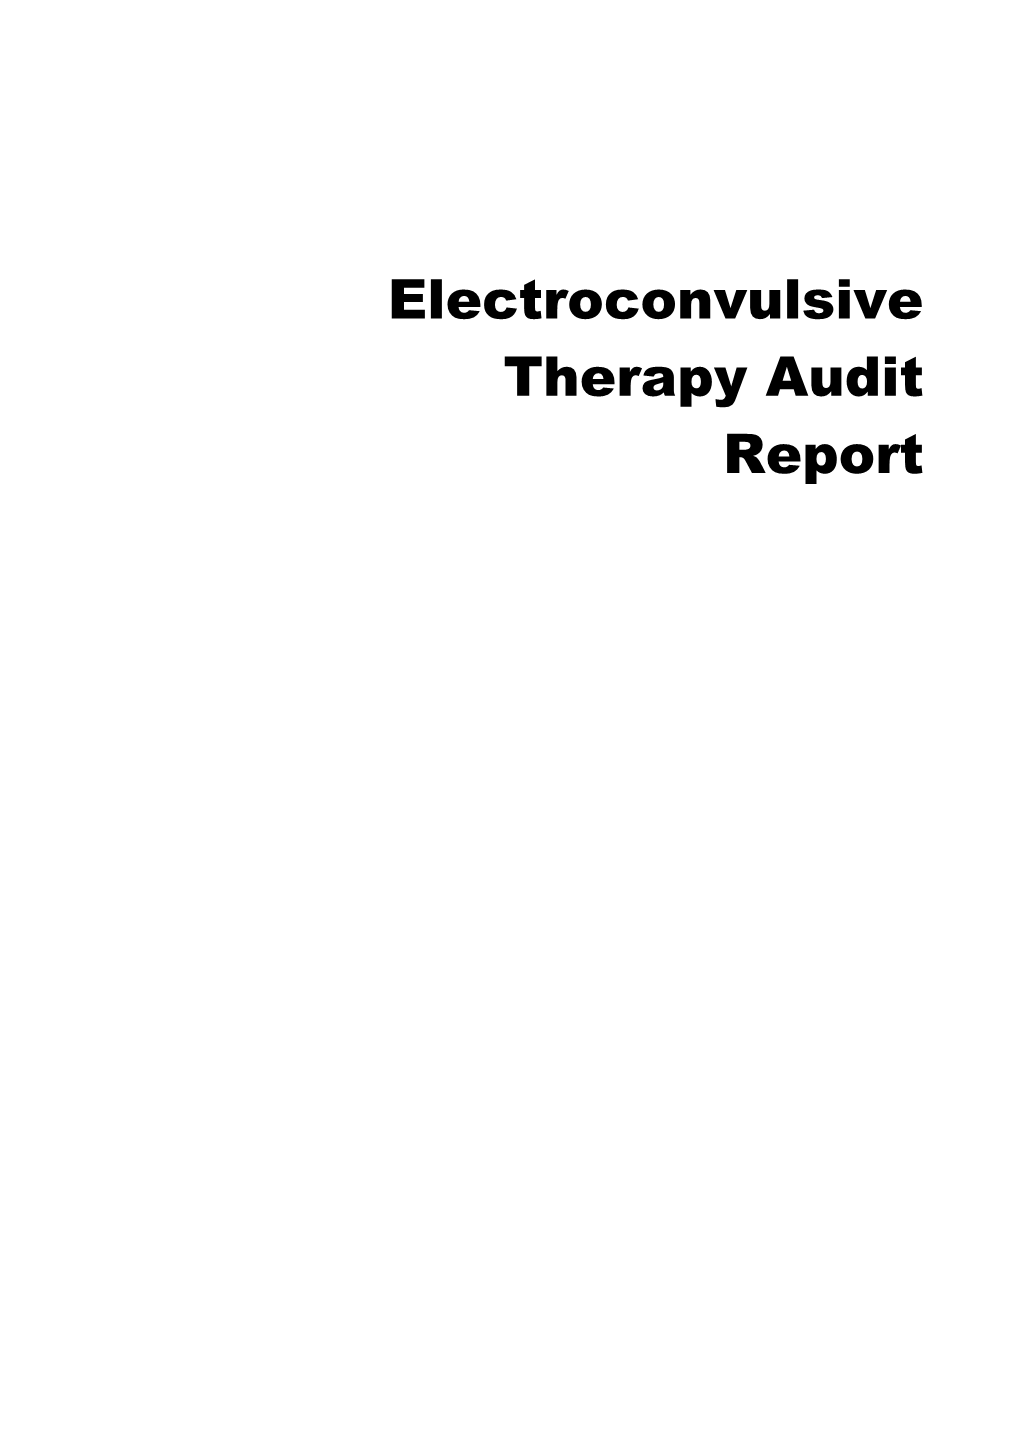 Electroconvulsive Therapy Audit Report